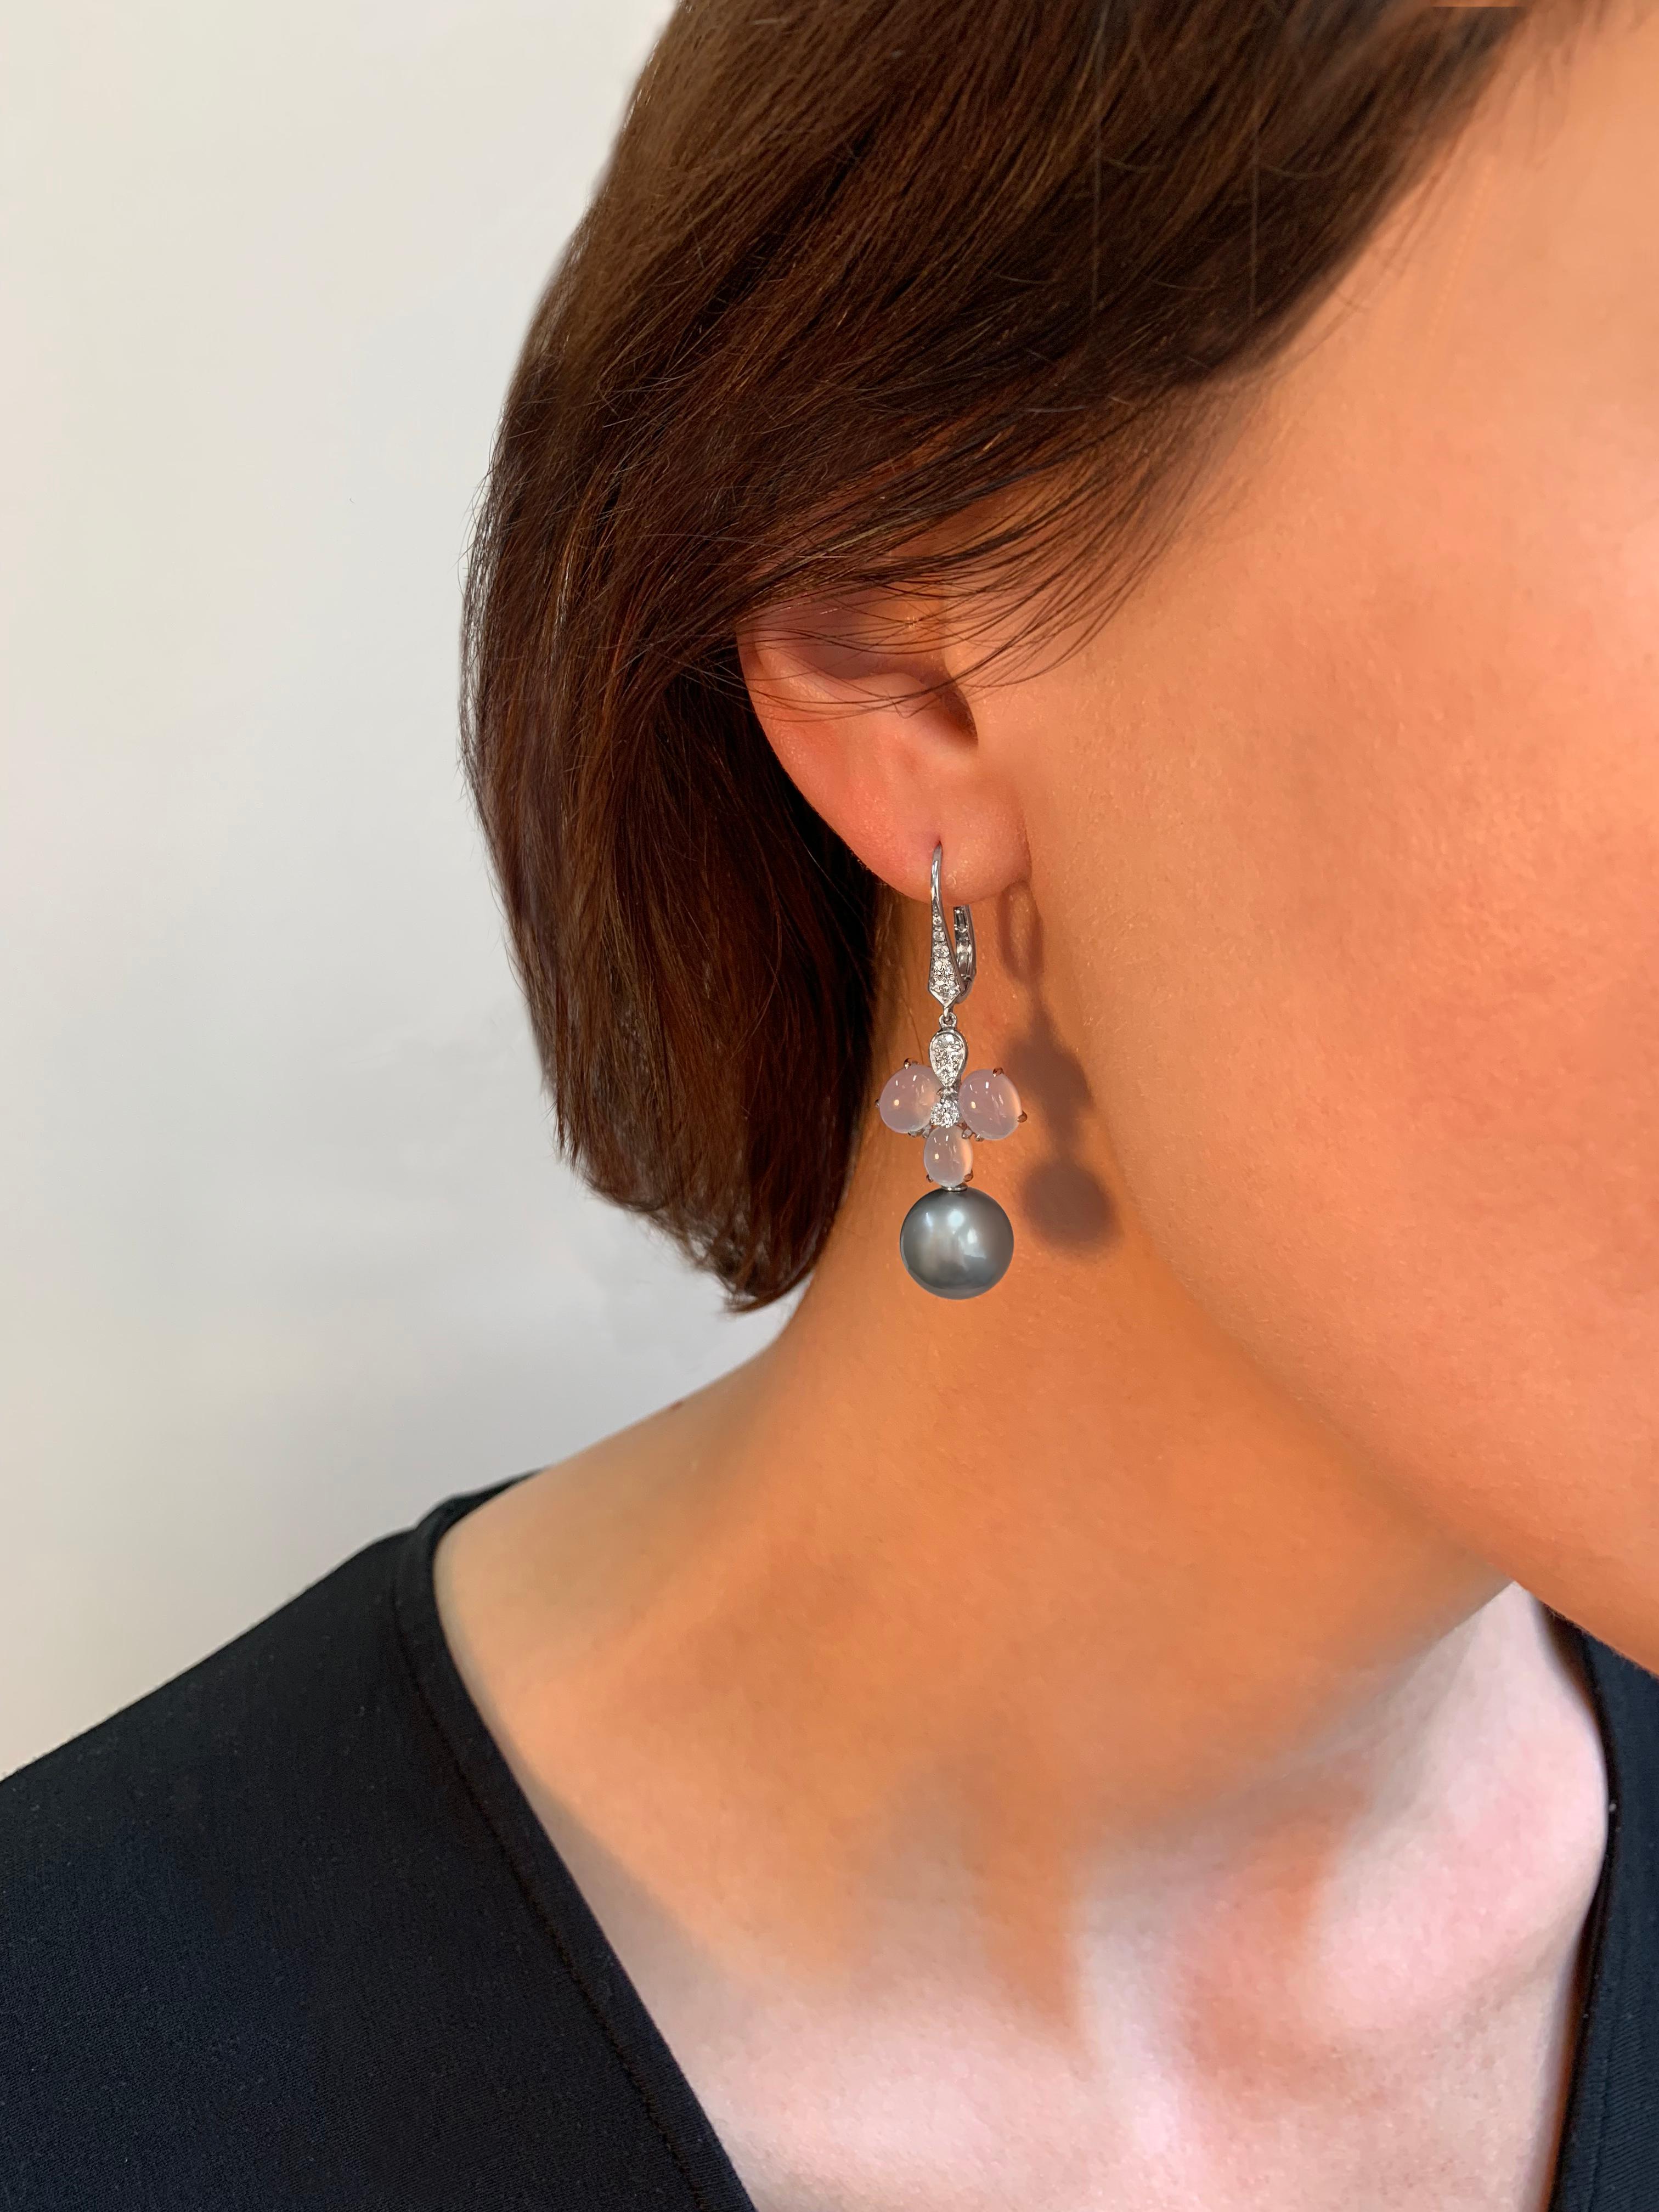 These lovely earrings by Yoko London feature Diamonds and Chalcedony that form a fun floral design. The lilac hues of the Chalcedony compliment the cool grey tones of the Tahitian pearl perfectly. These colours are enriched further by the muted 18